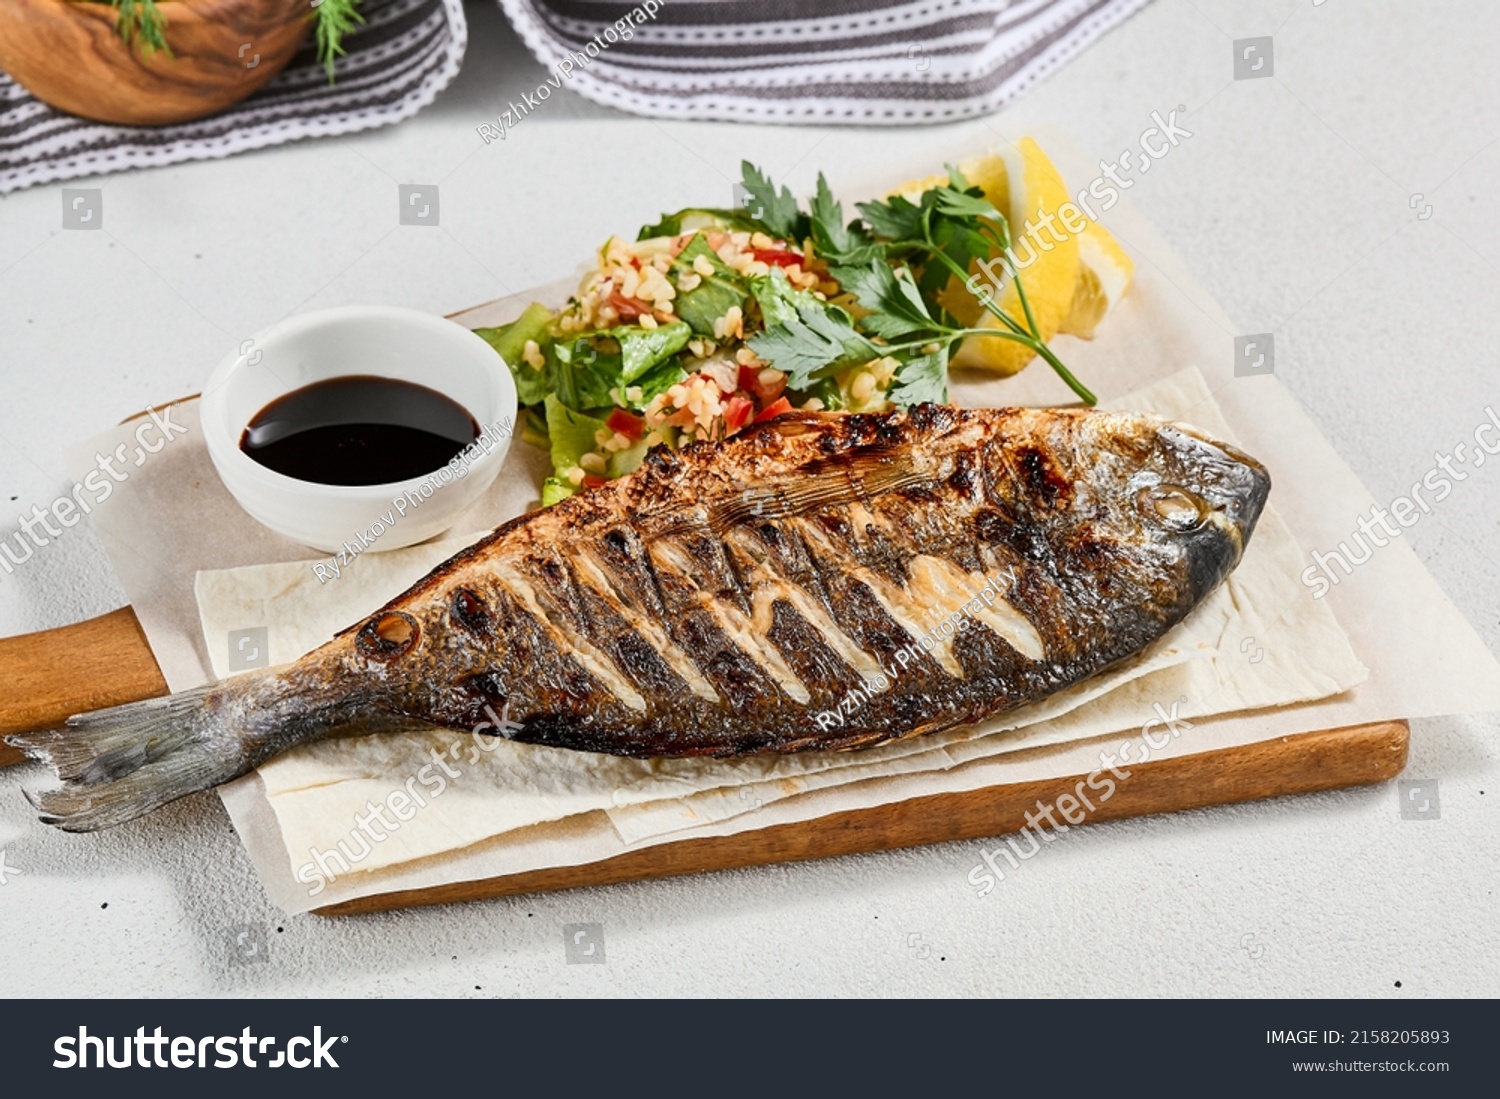 Grilled dorado with garnish on concrete background. Aesthetic composition with bbq fish and vegetables. Healthy food - roasted dorado. Fish dish in minimal style. Whole grilled fish #2158205893